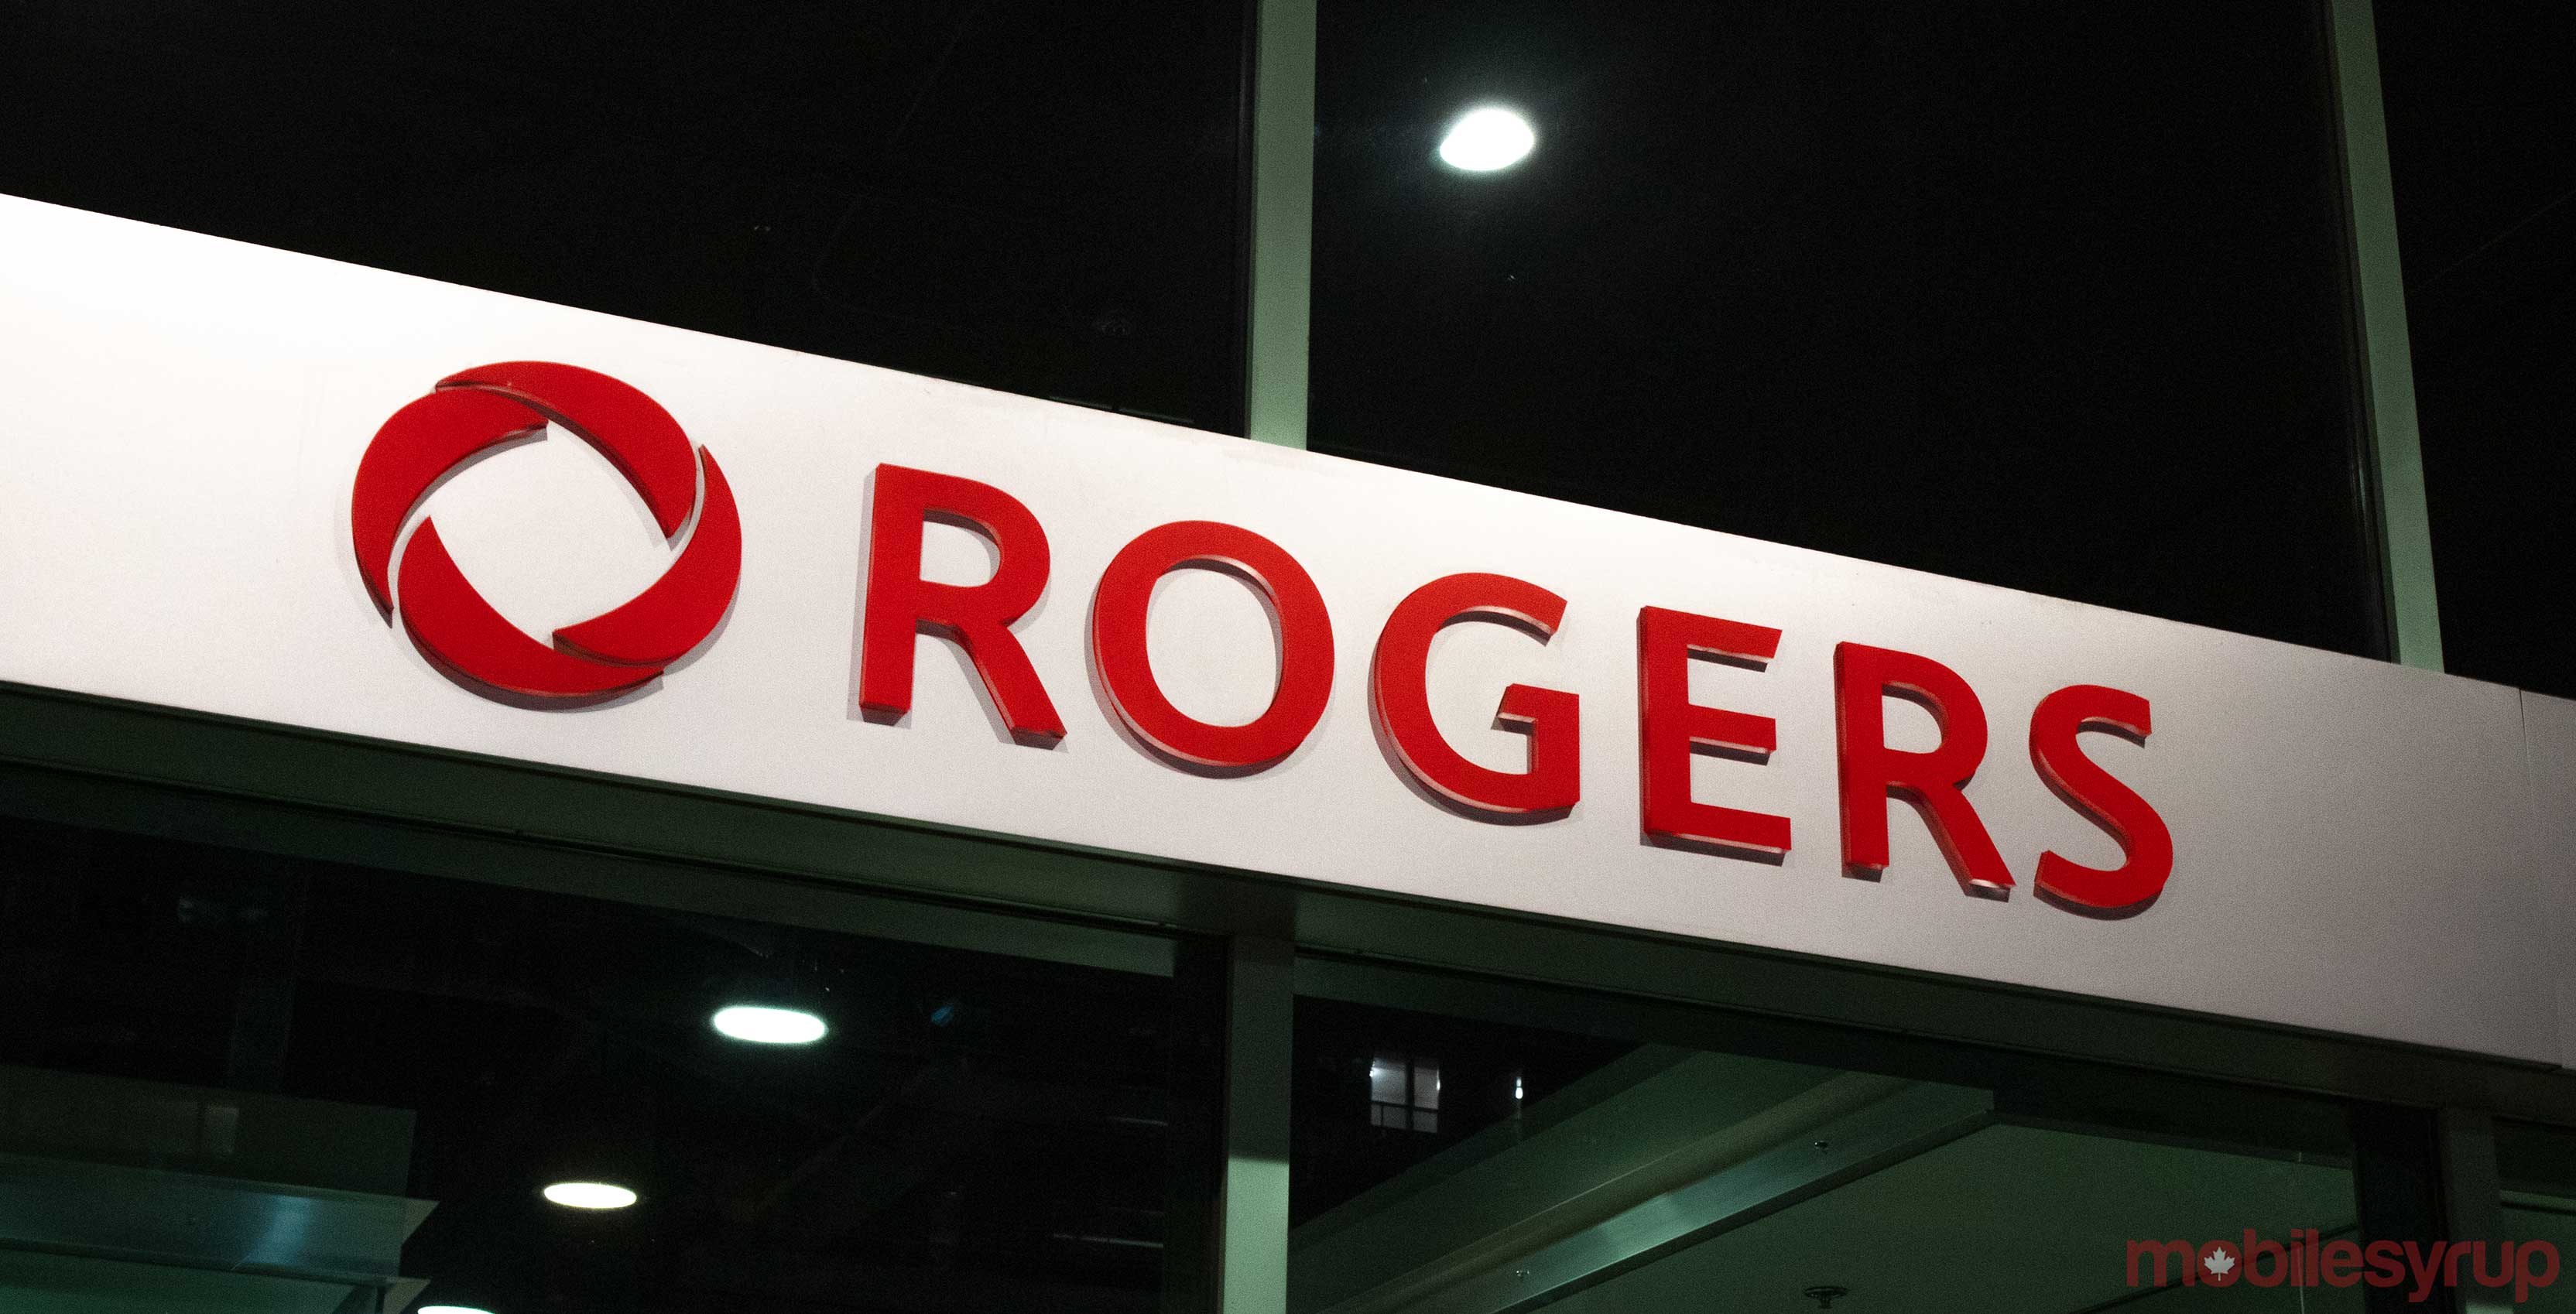 Rogers Black Friday promo offers deals on Galaxy devices, iPhones and more